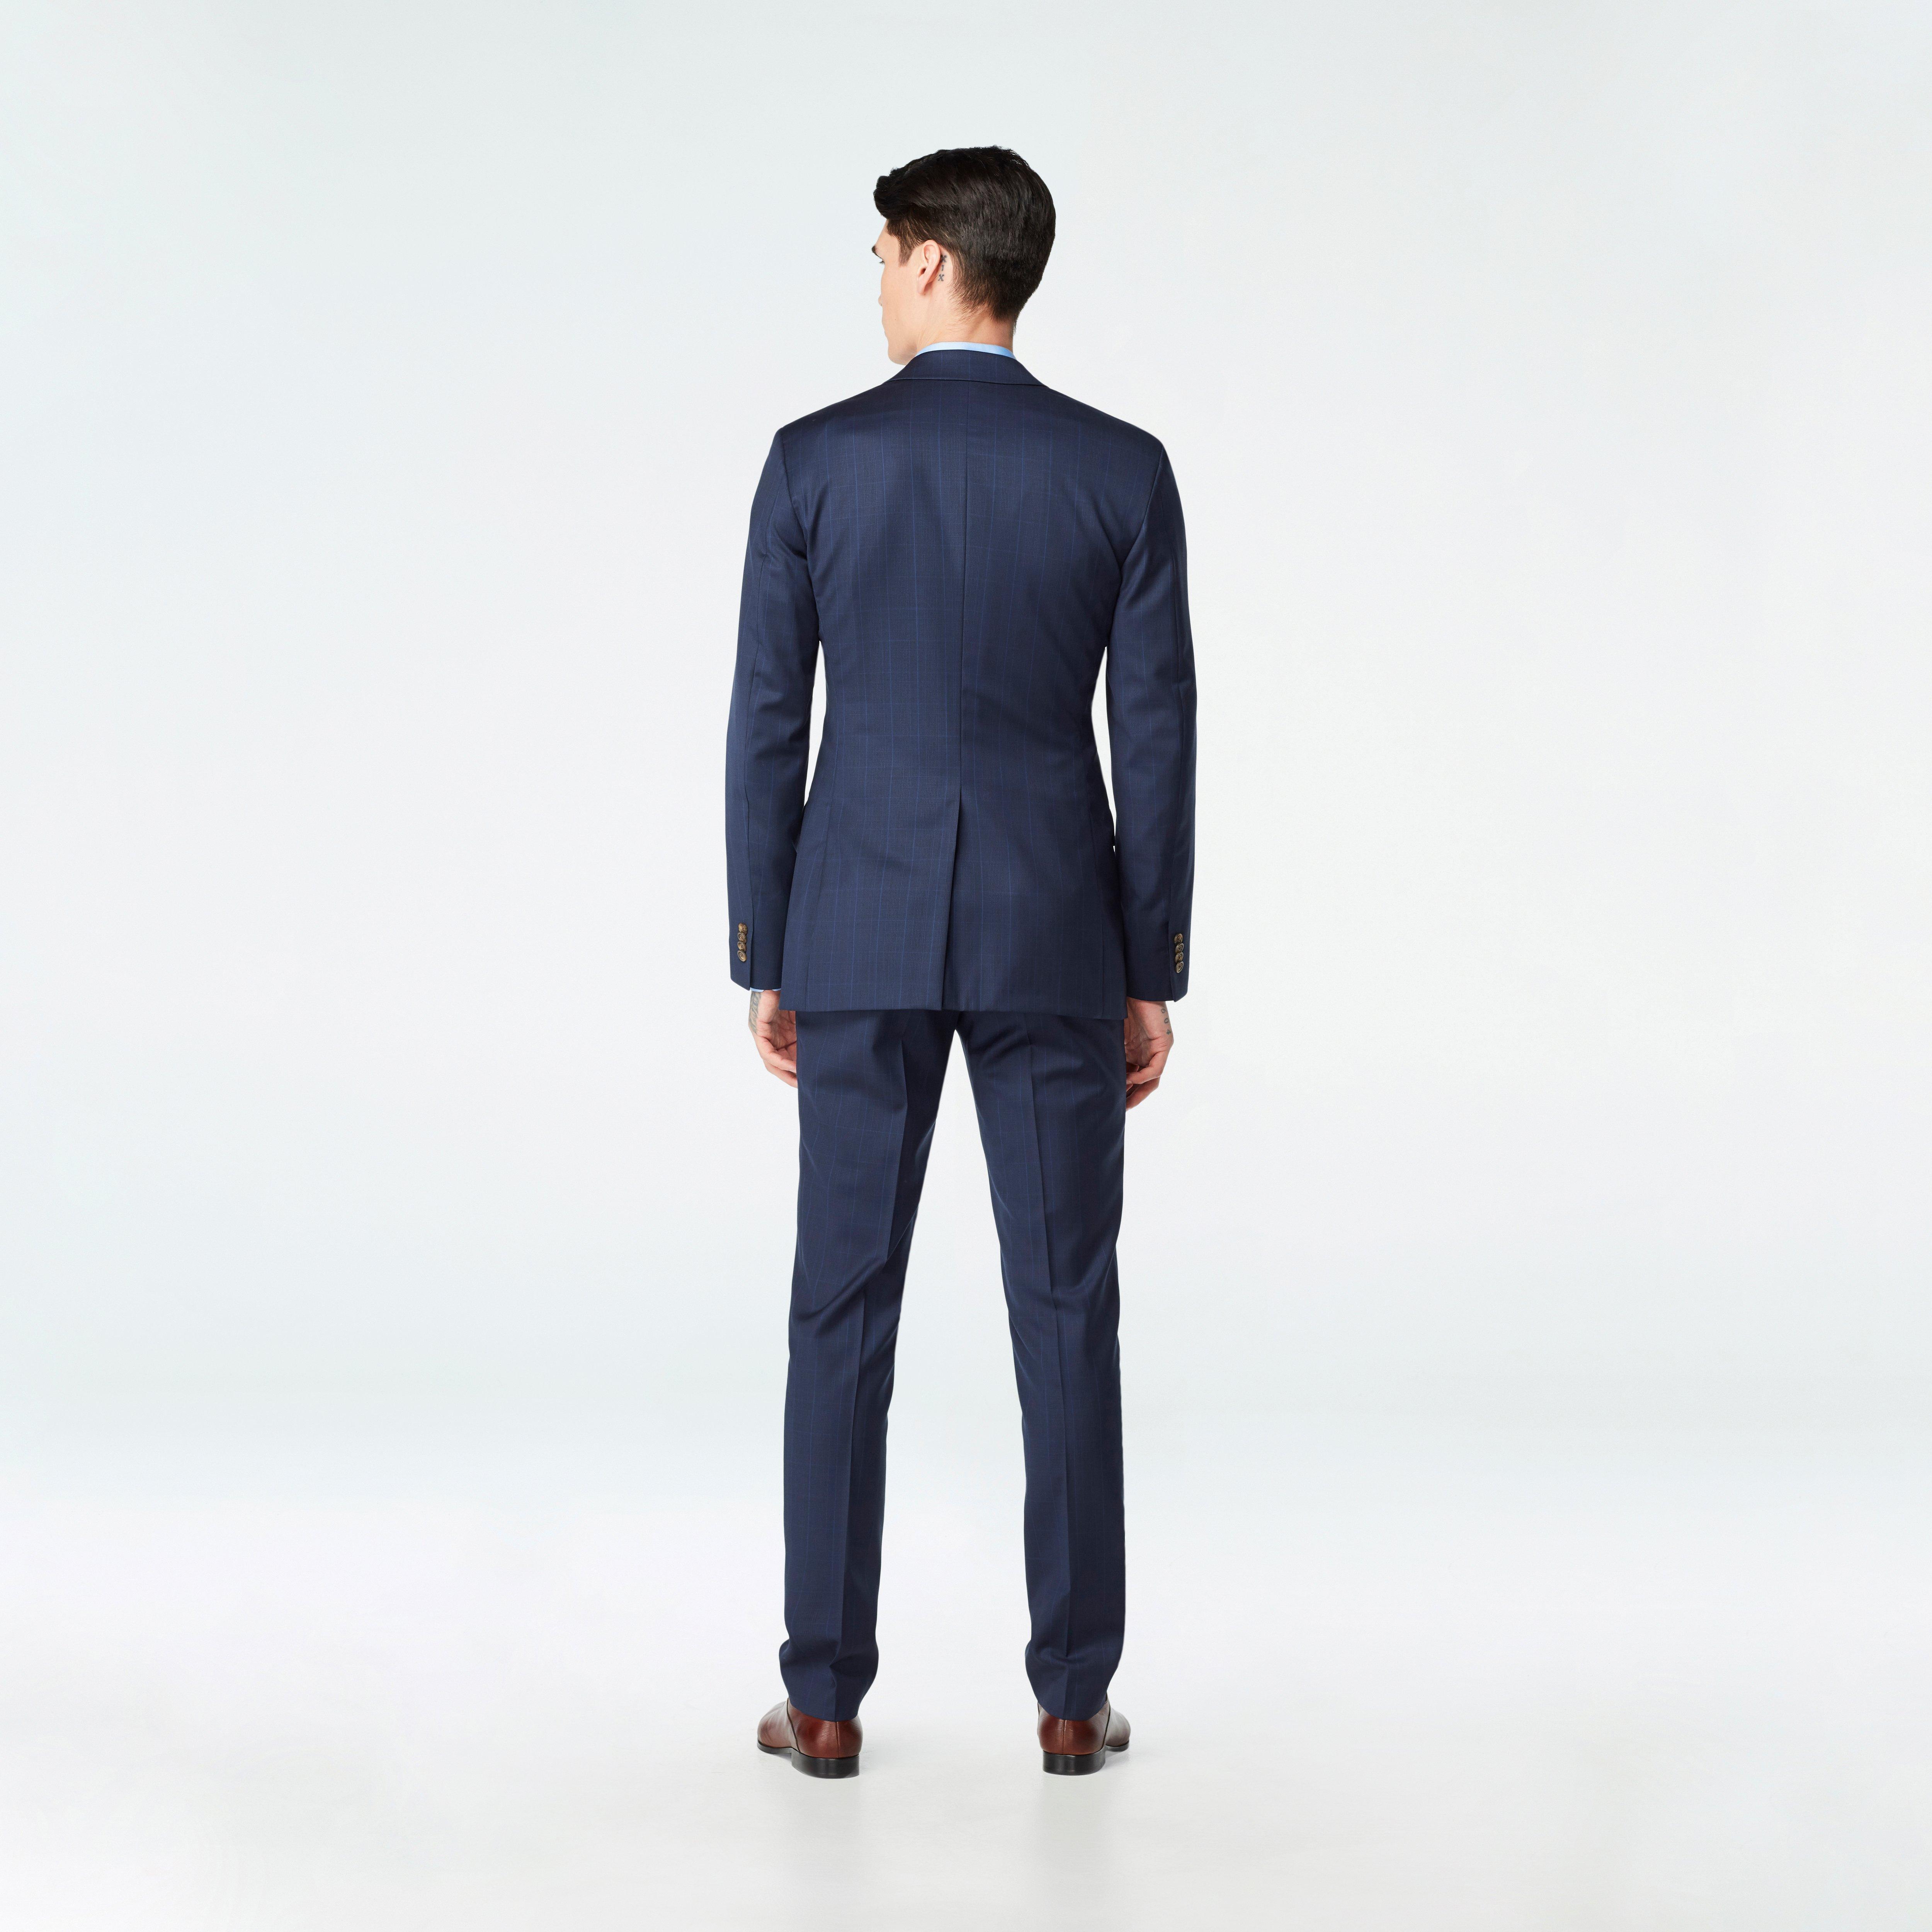 Custom Suits Made For You - Hemsworth Prince of Wales Midnight Blue ...